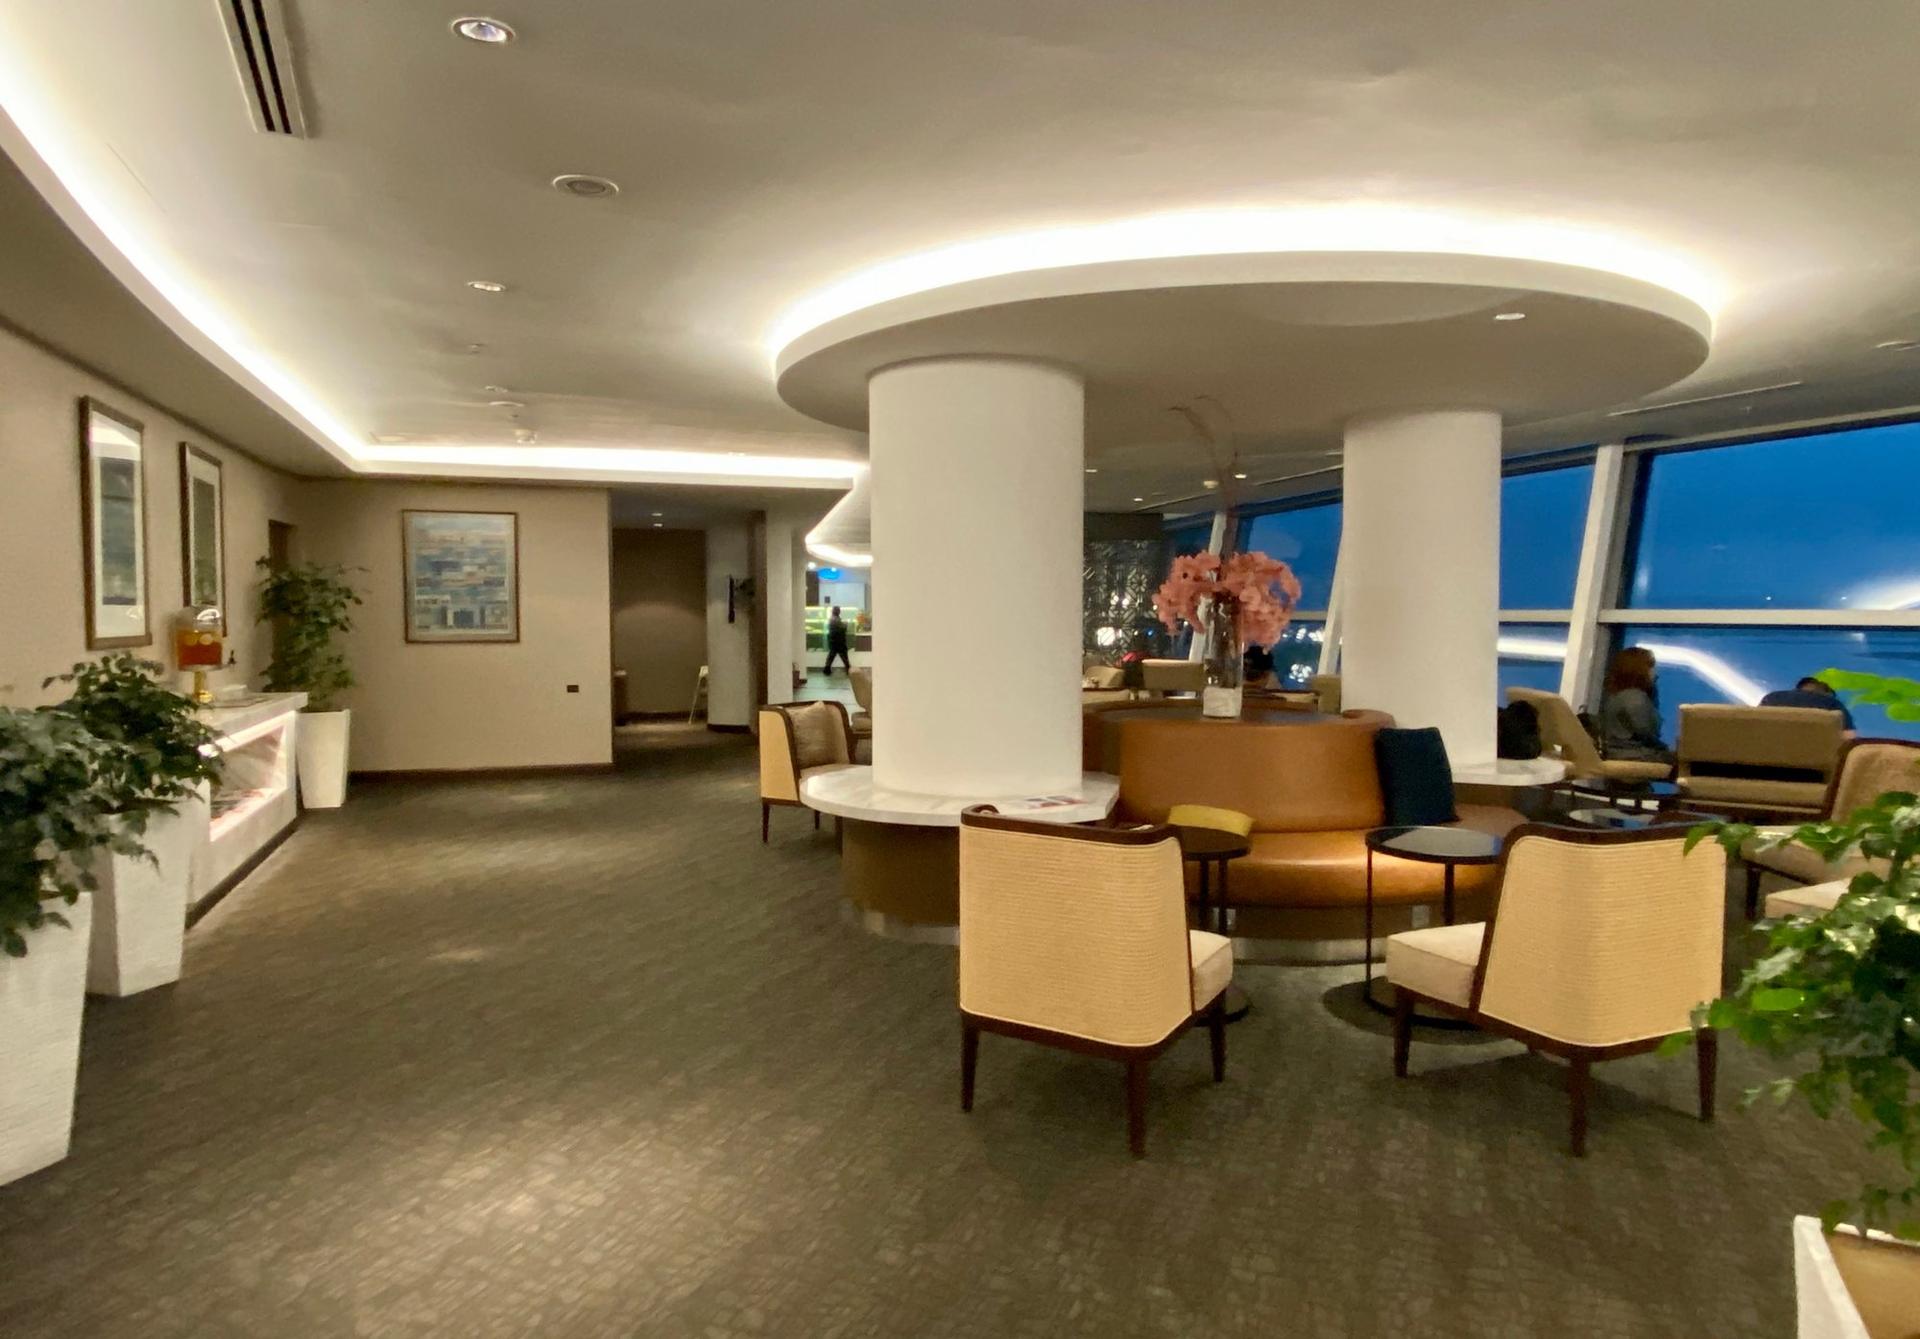 Malaysia Airlines Golden Lounge (Domestic) image 5 of 6